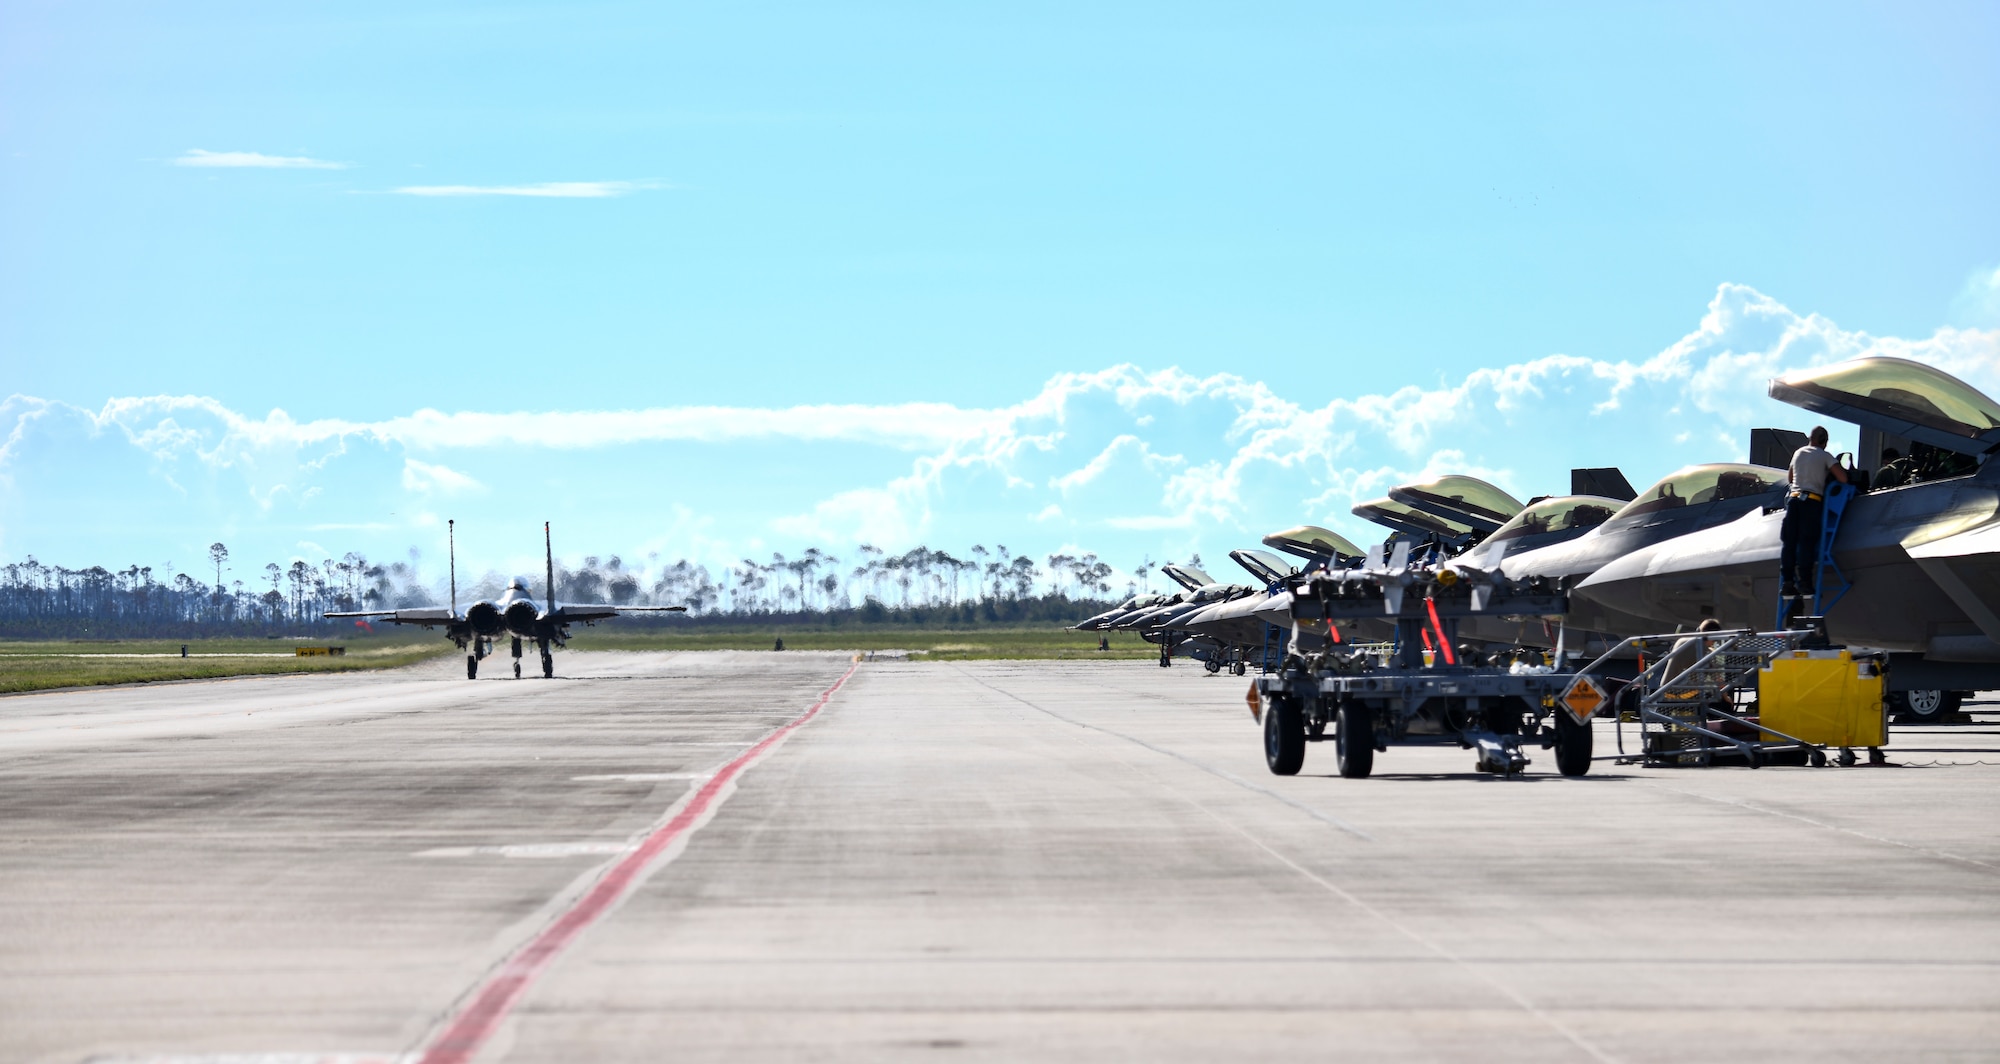 A U.S. Air Force F-15 Eagle taxis the runway at Tyndall Air Force Base, Florida, Sept. 18, 2020. The aircraft and aircrew participated in a Weapons System Evaluation Program held at Tyndall on behalf of Air Combat Command to evaluate the functionality of the weapons system for air-to-air and air-to-ground missions. (U.S. Air Force photo by Senior Airman Stefan Alvarez)